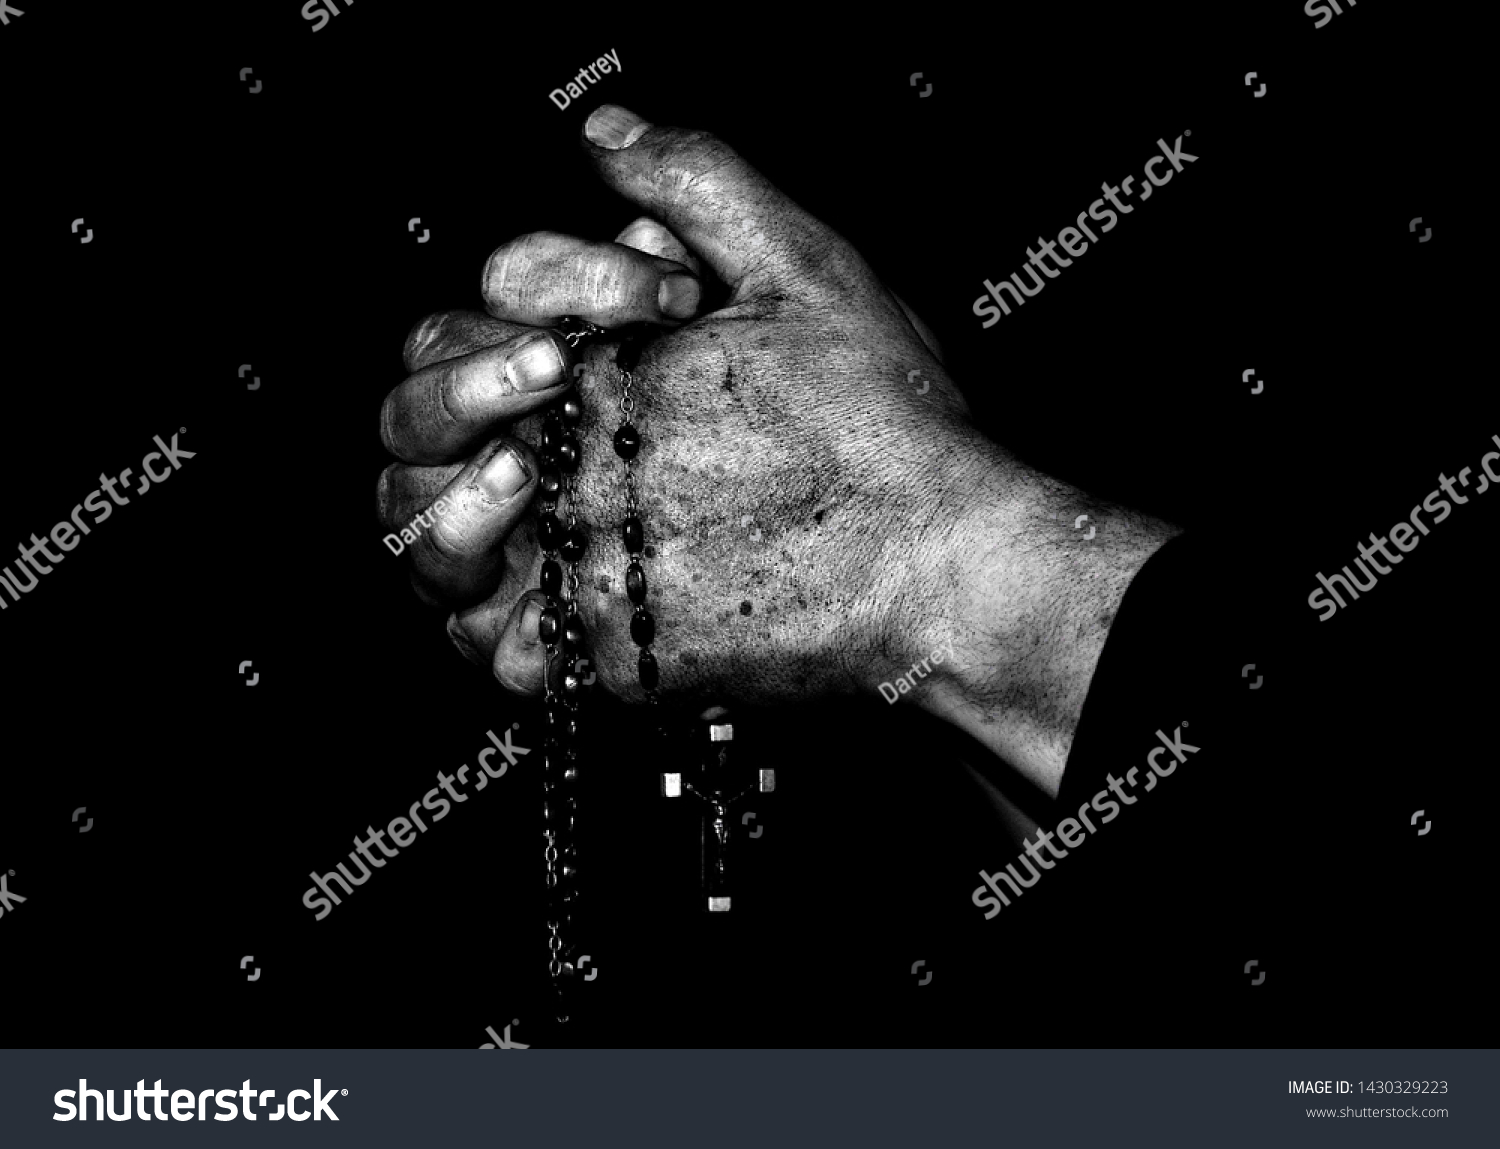 Hands clasped in prayer clutching a rosary #1430329223